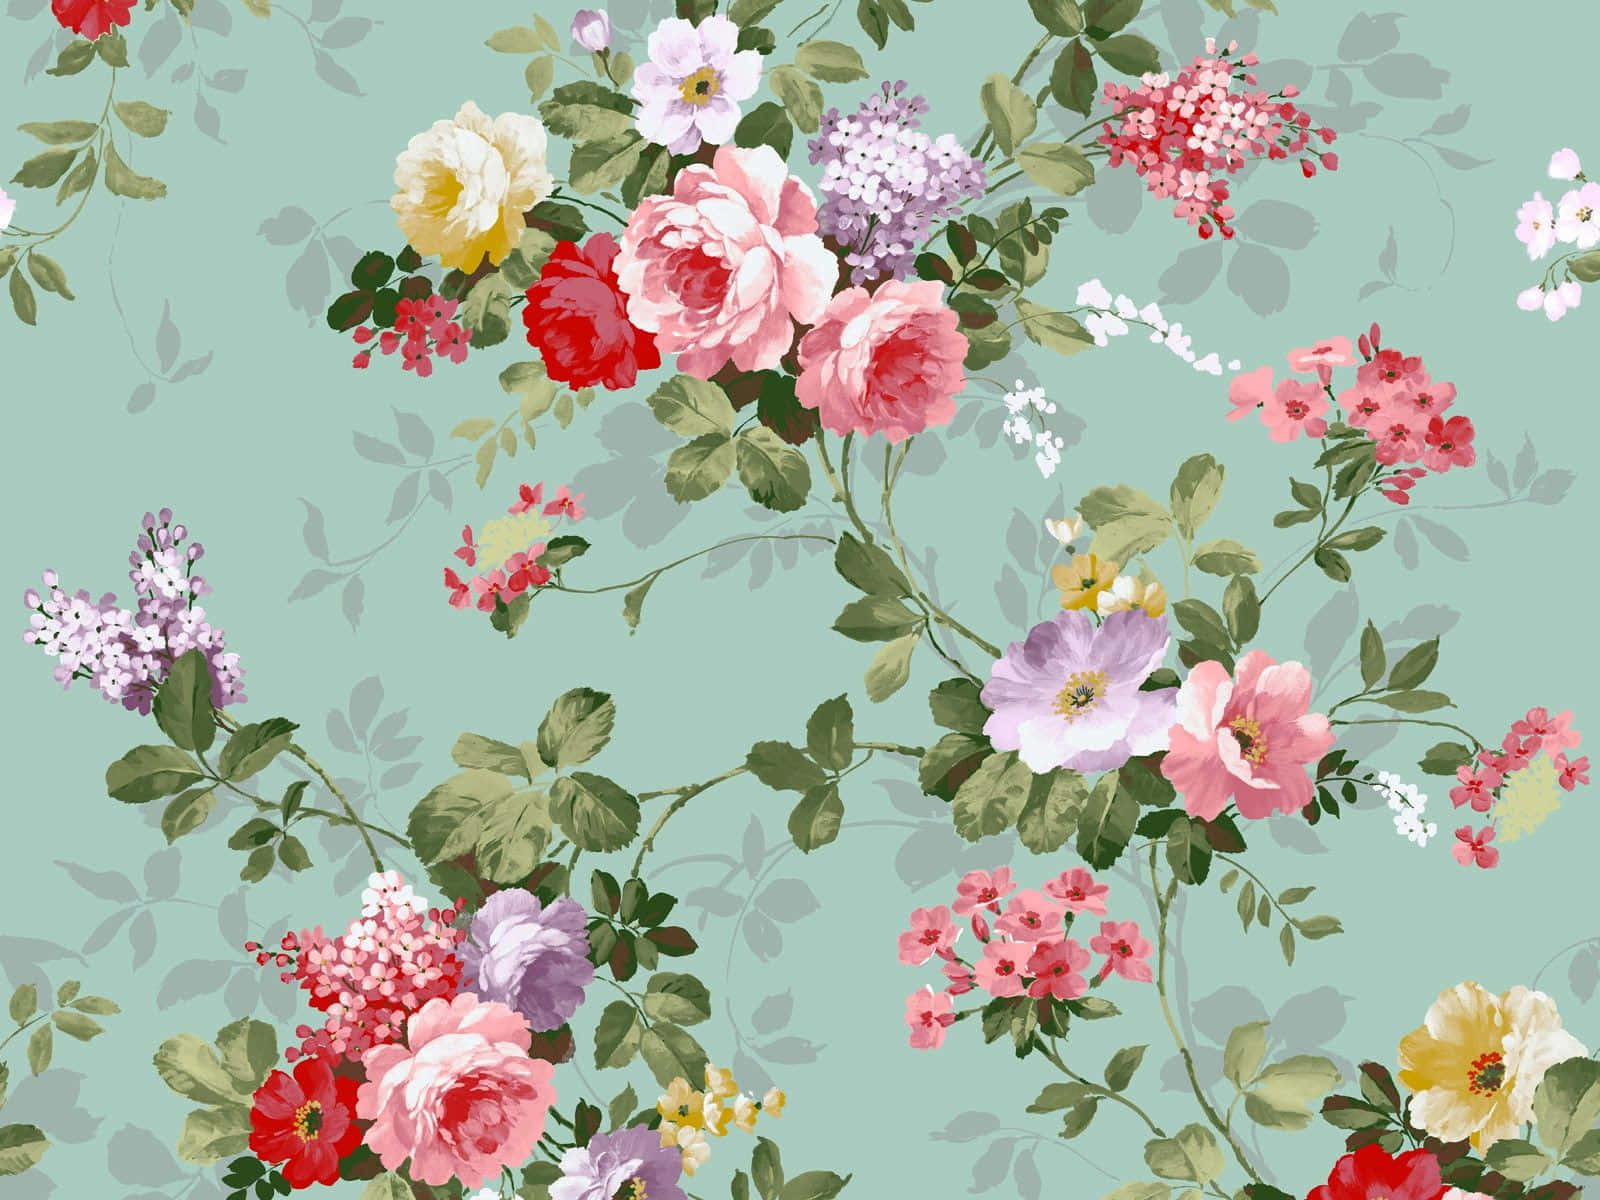 A Floral Pattern With Pink And Red Flowers